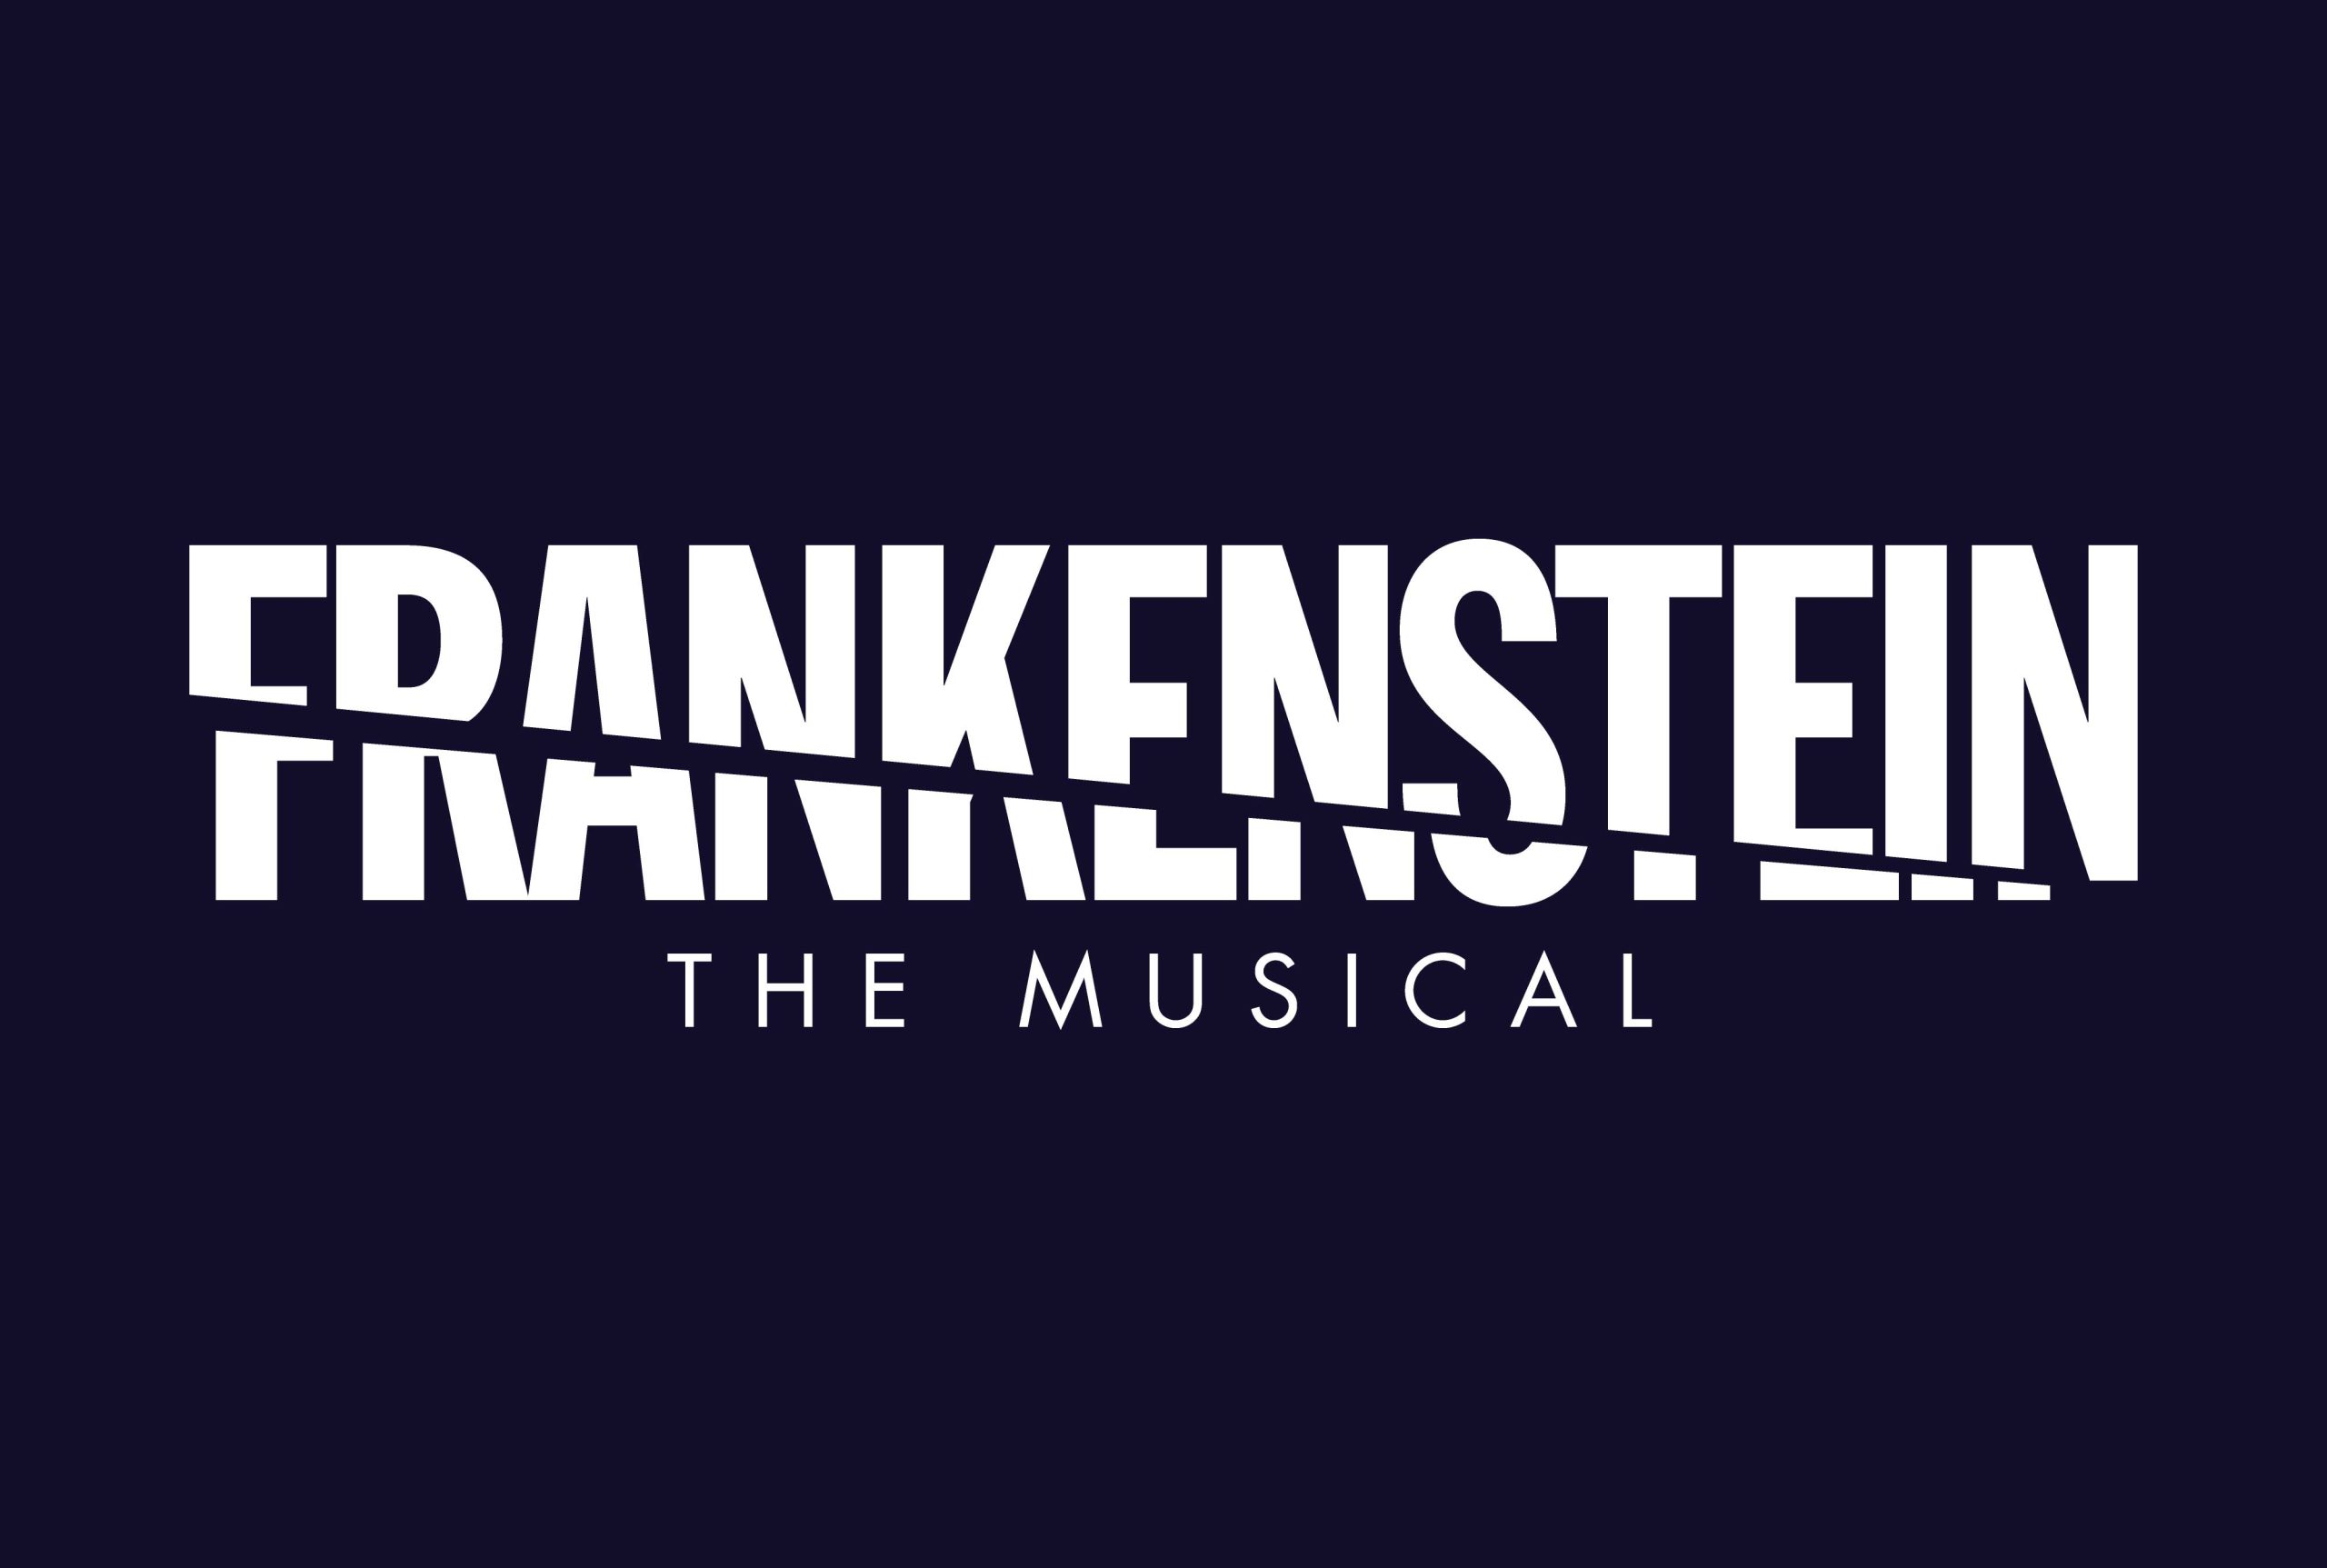 Frankenstein, the musical by Circle Arts Theatre